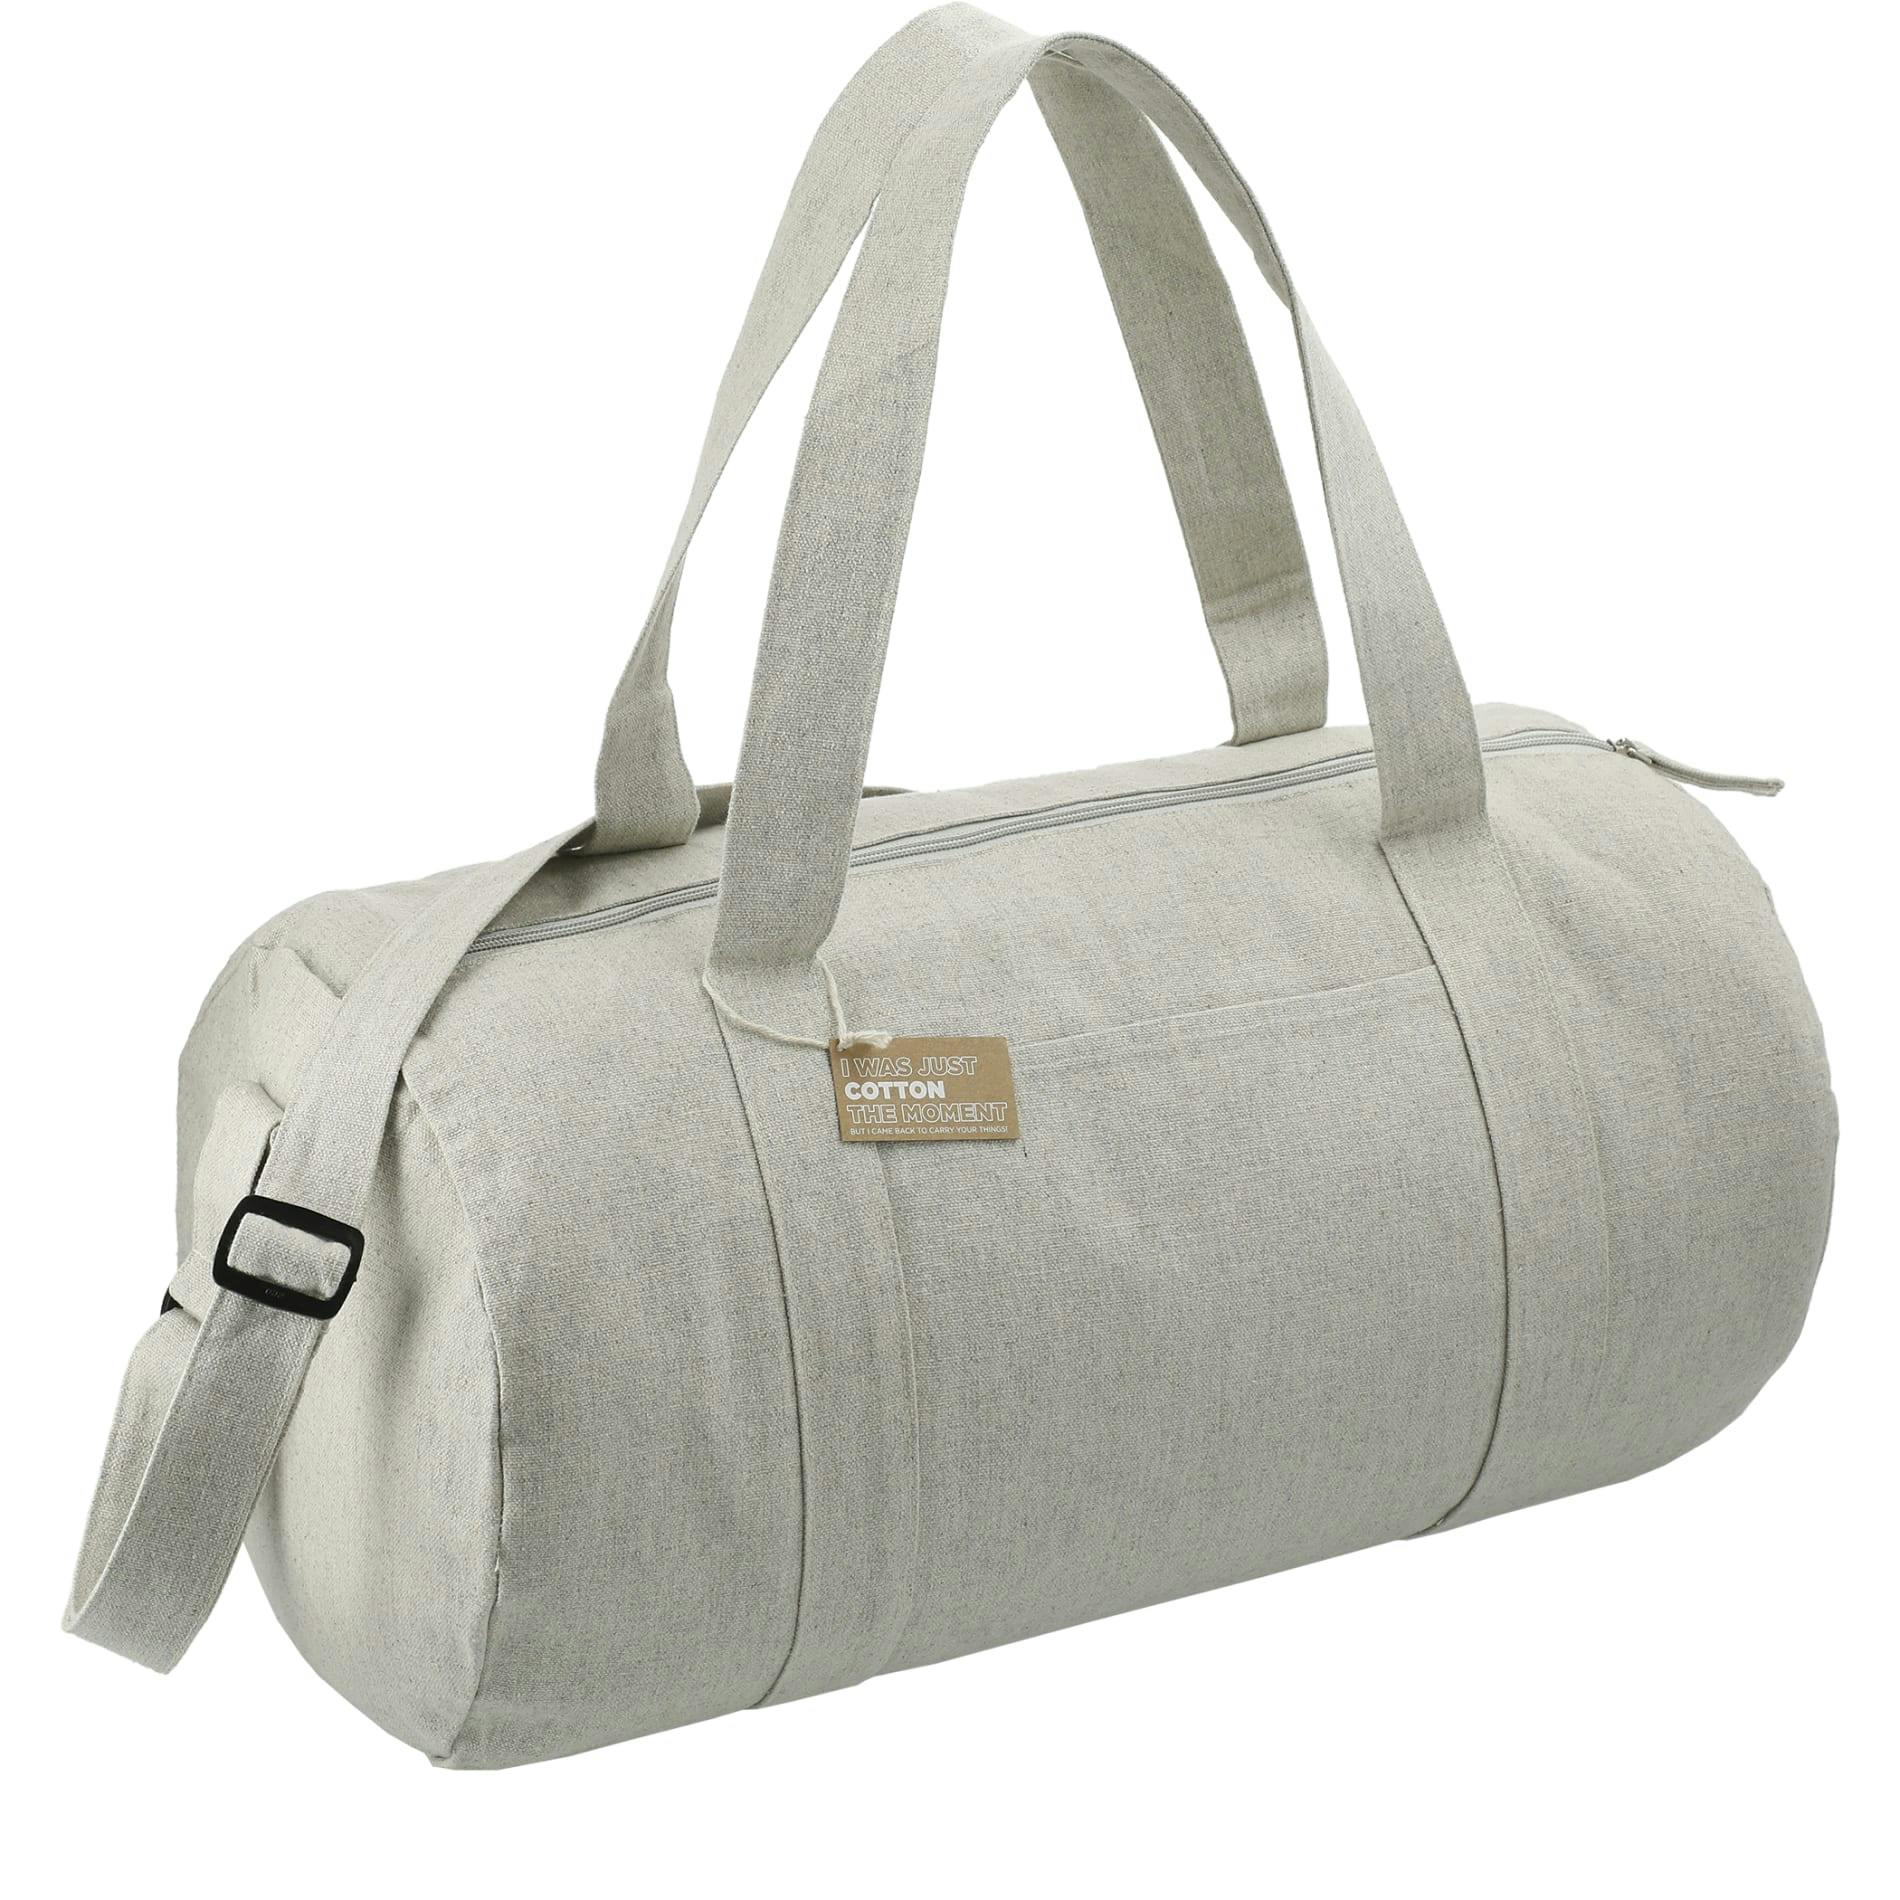 Repose 10oz Recycled Cotton Barrel Duffel - additional Image 3